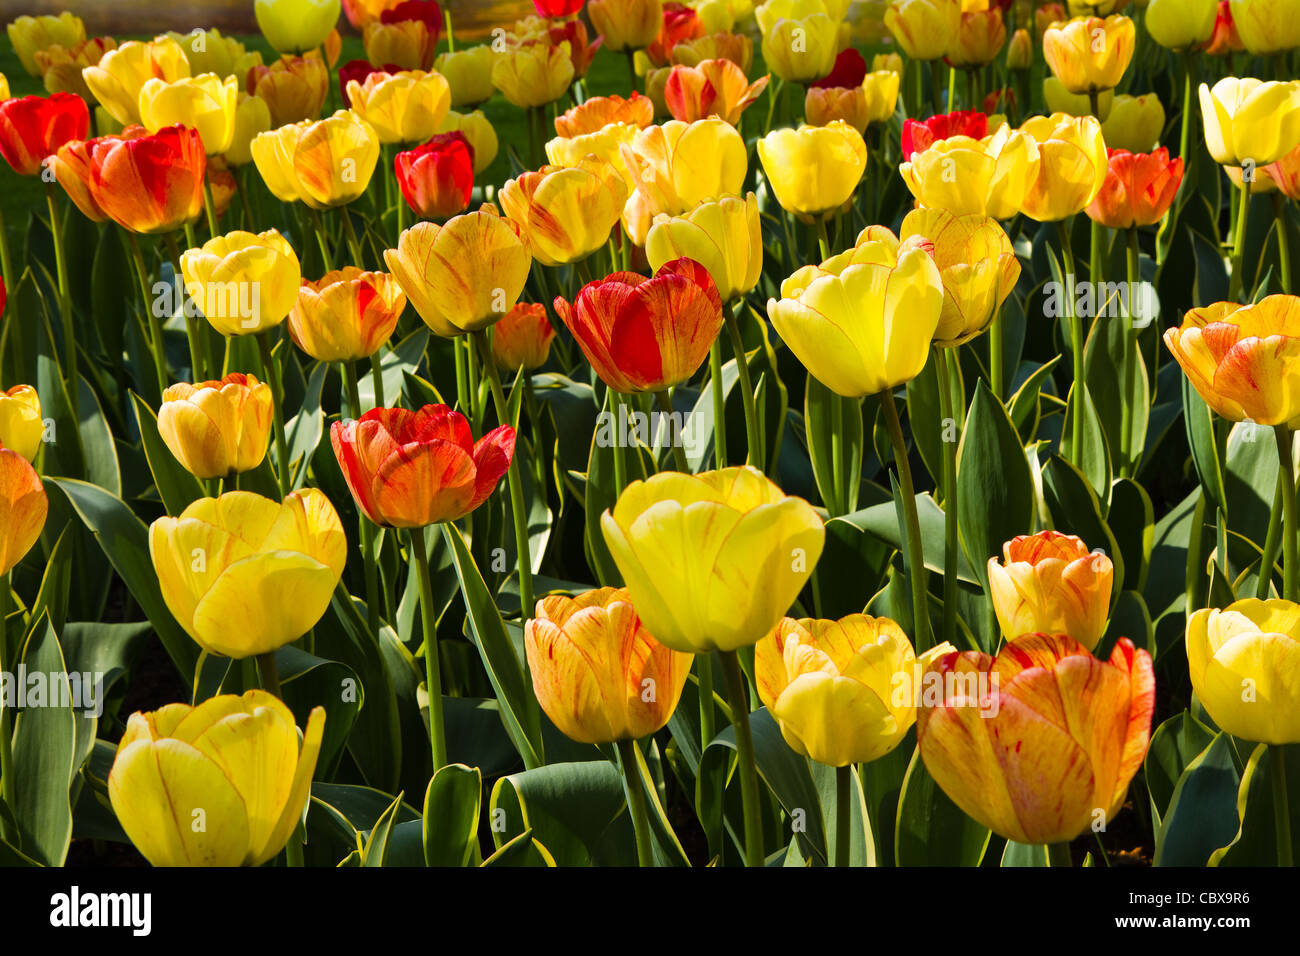 Flowerbed with colorful flamy tulips in spring sunshine Stock Photo